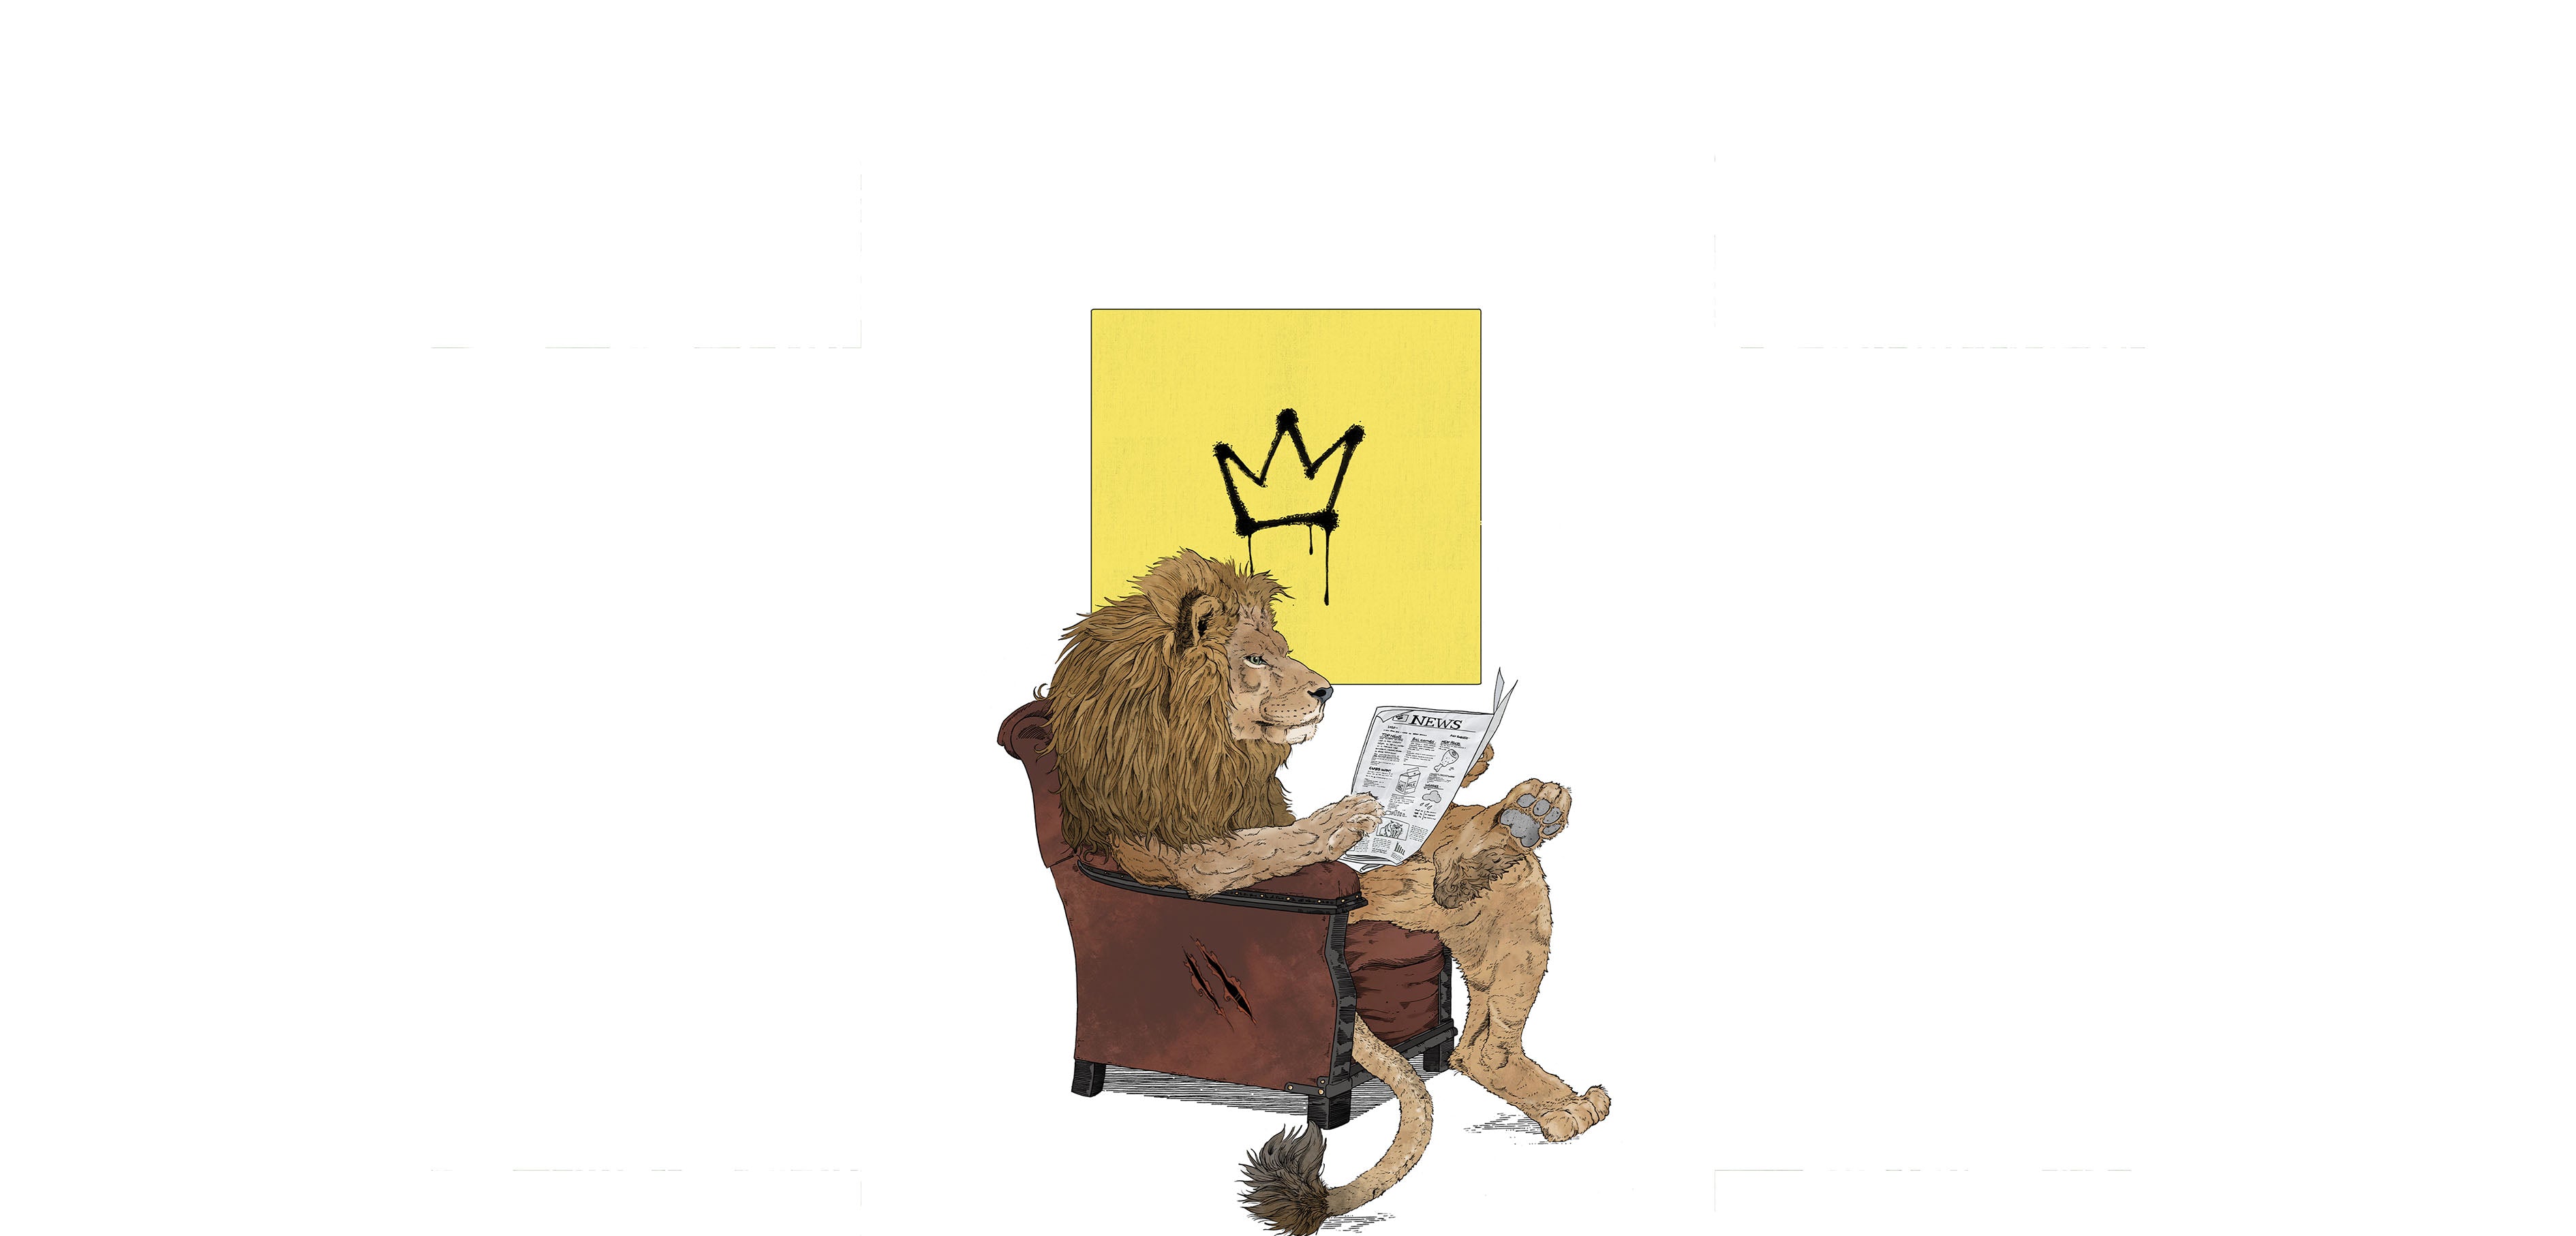 Boys room inspo mood board with lion king fine art wall print hand illustrated with yellow canvas and crown